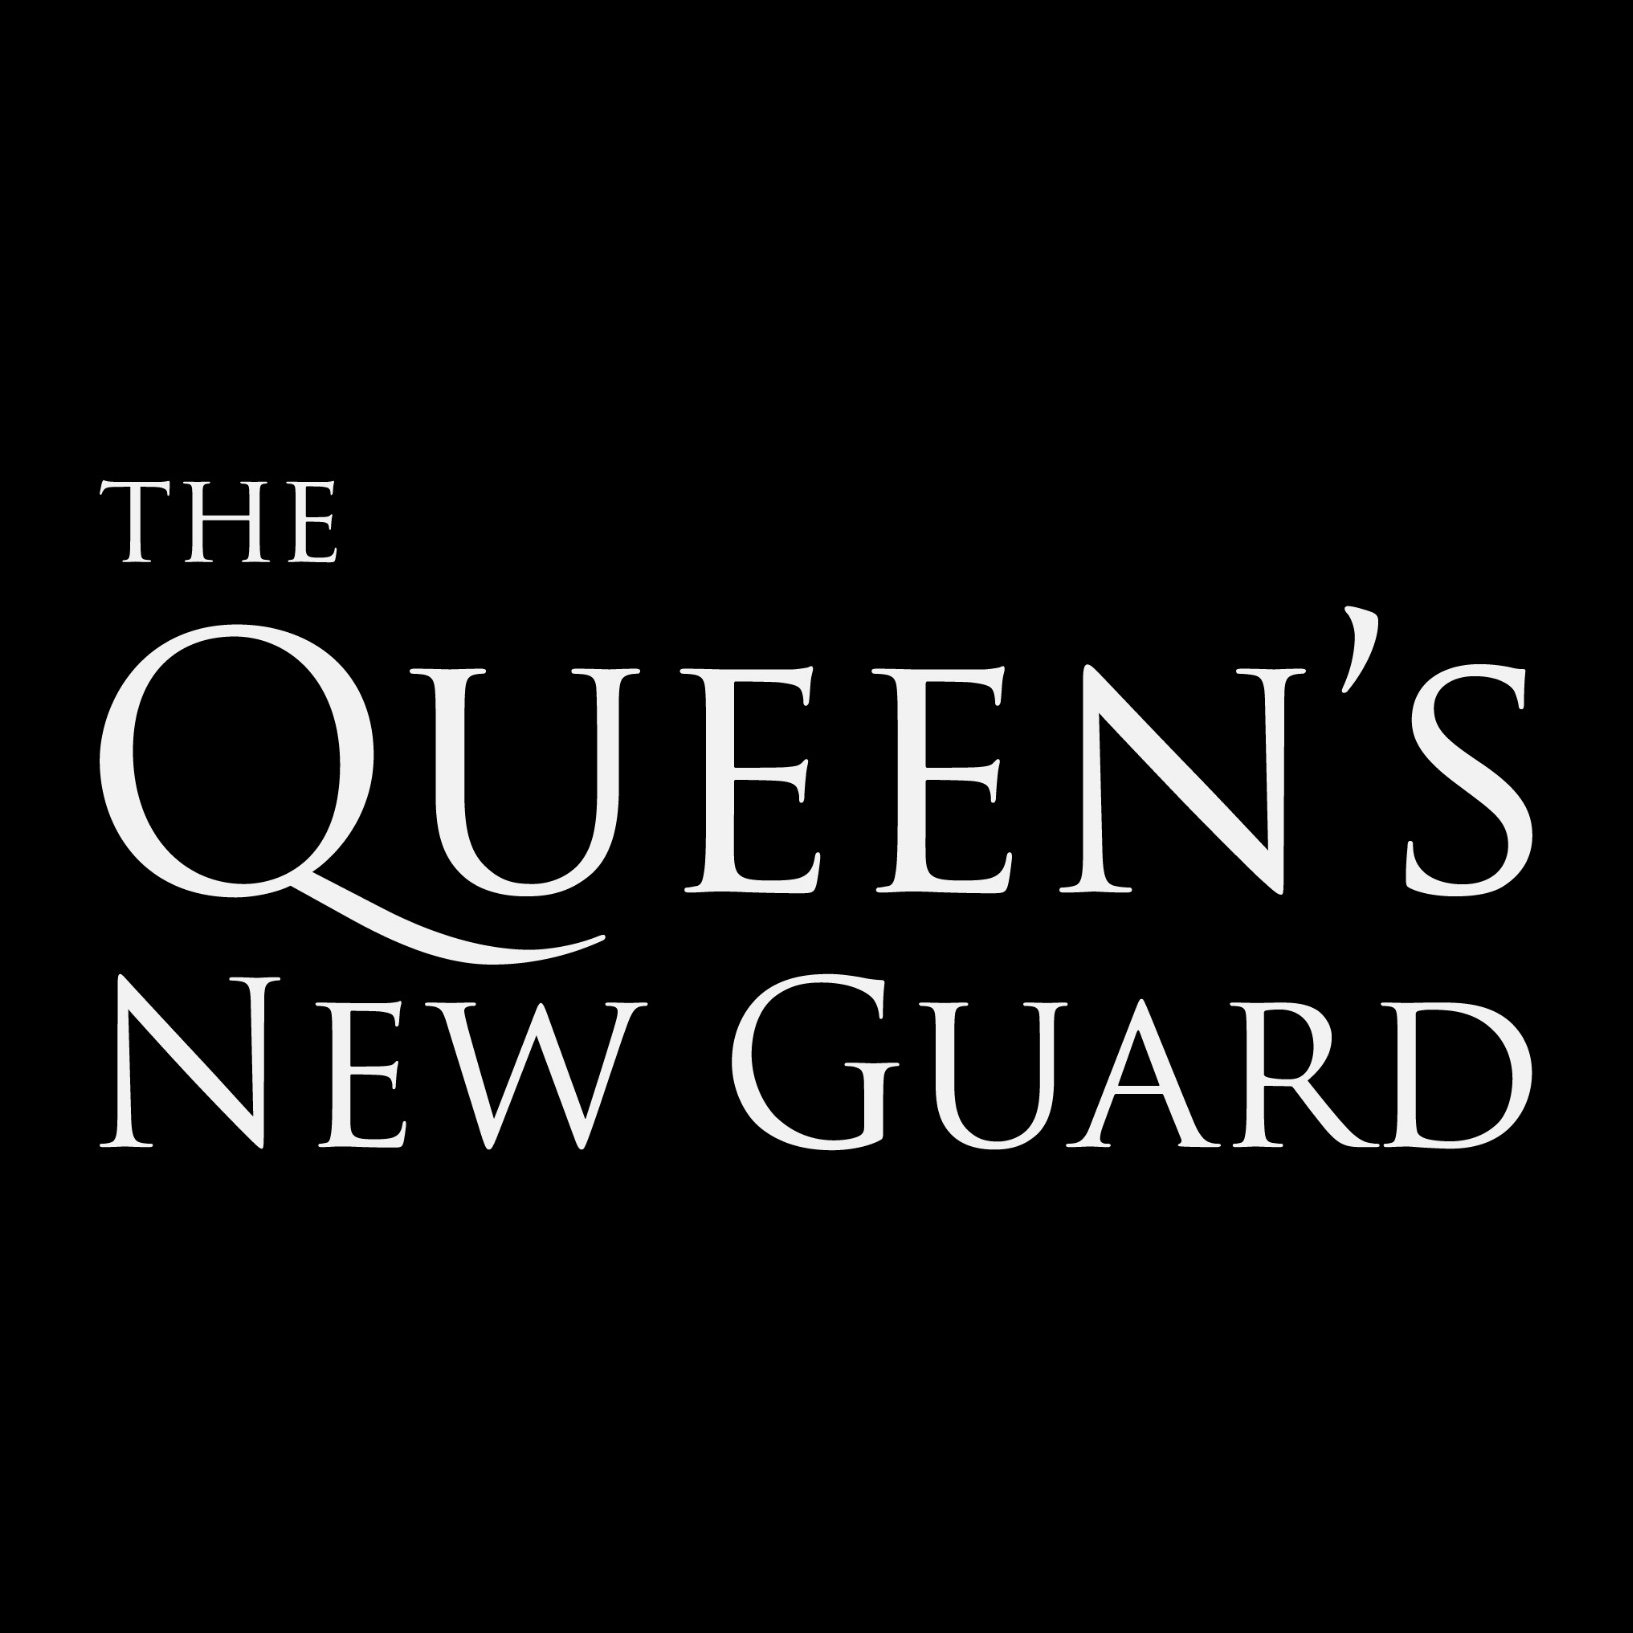 The Queens New Guard